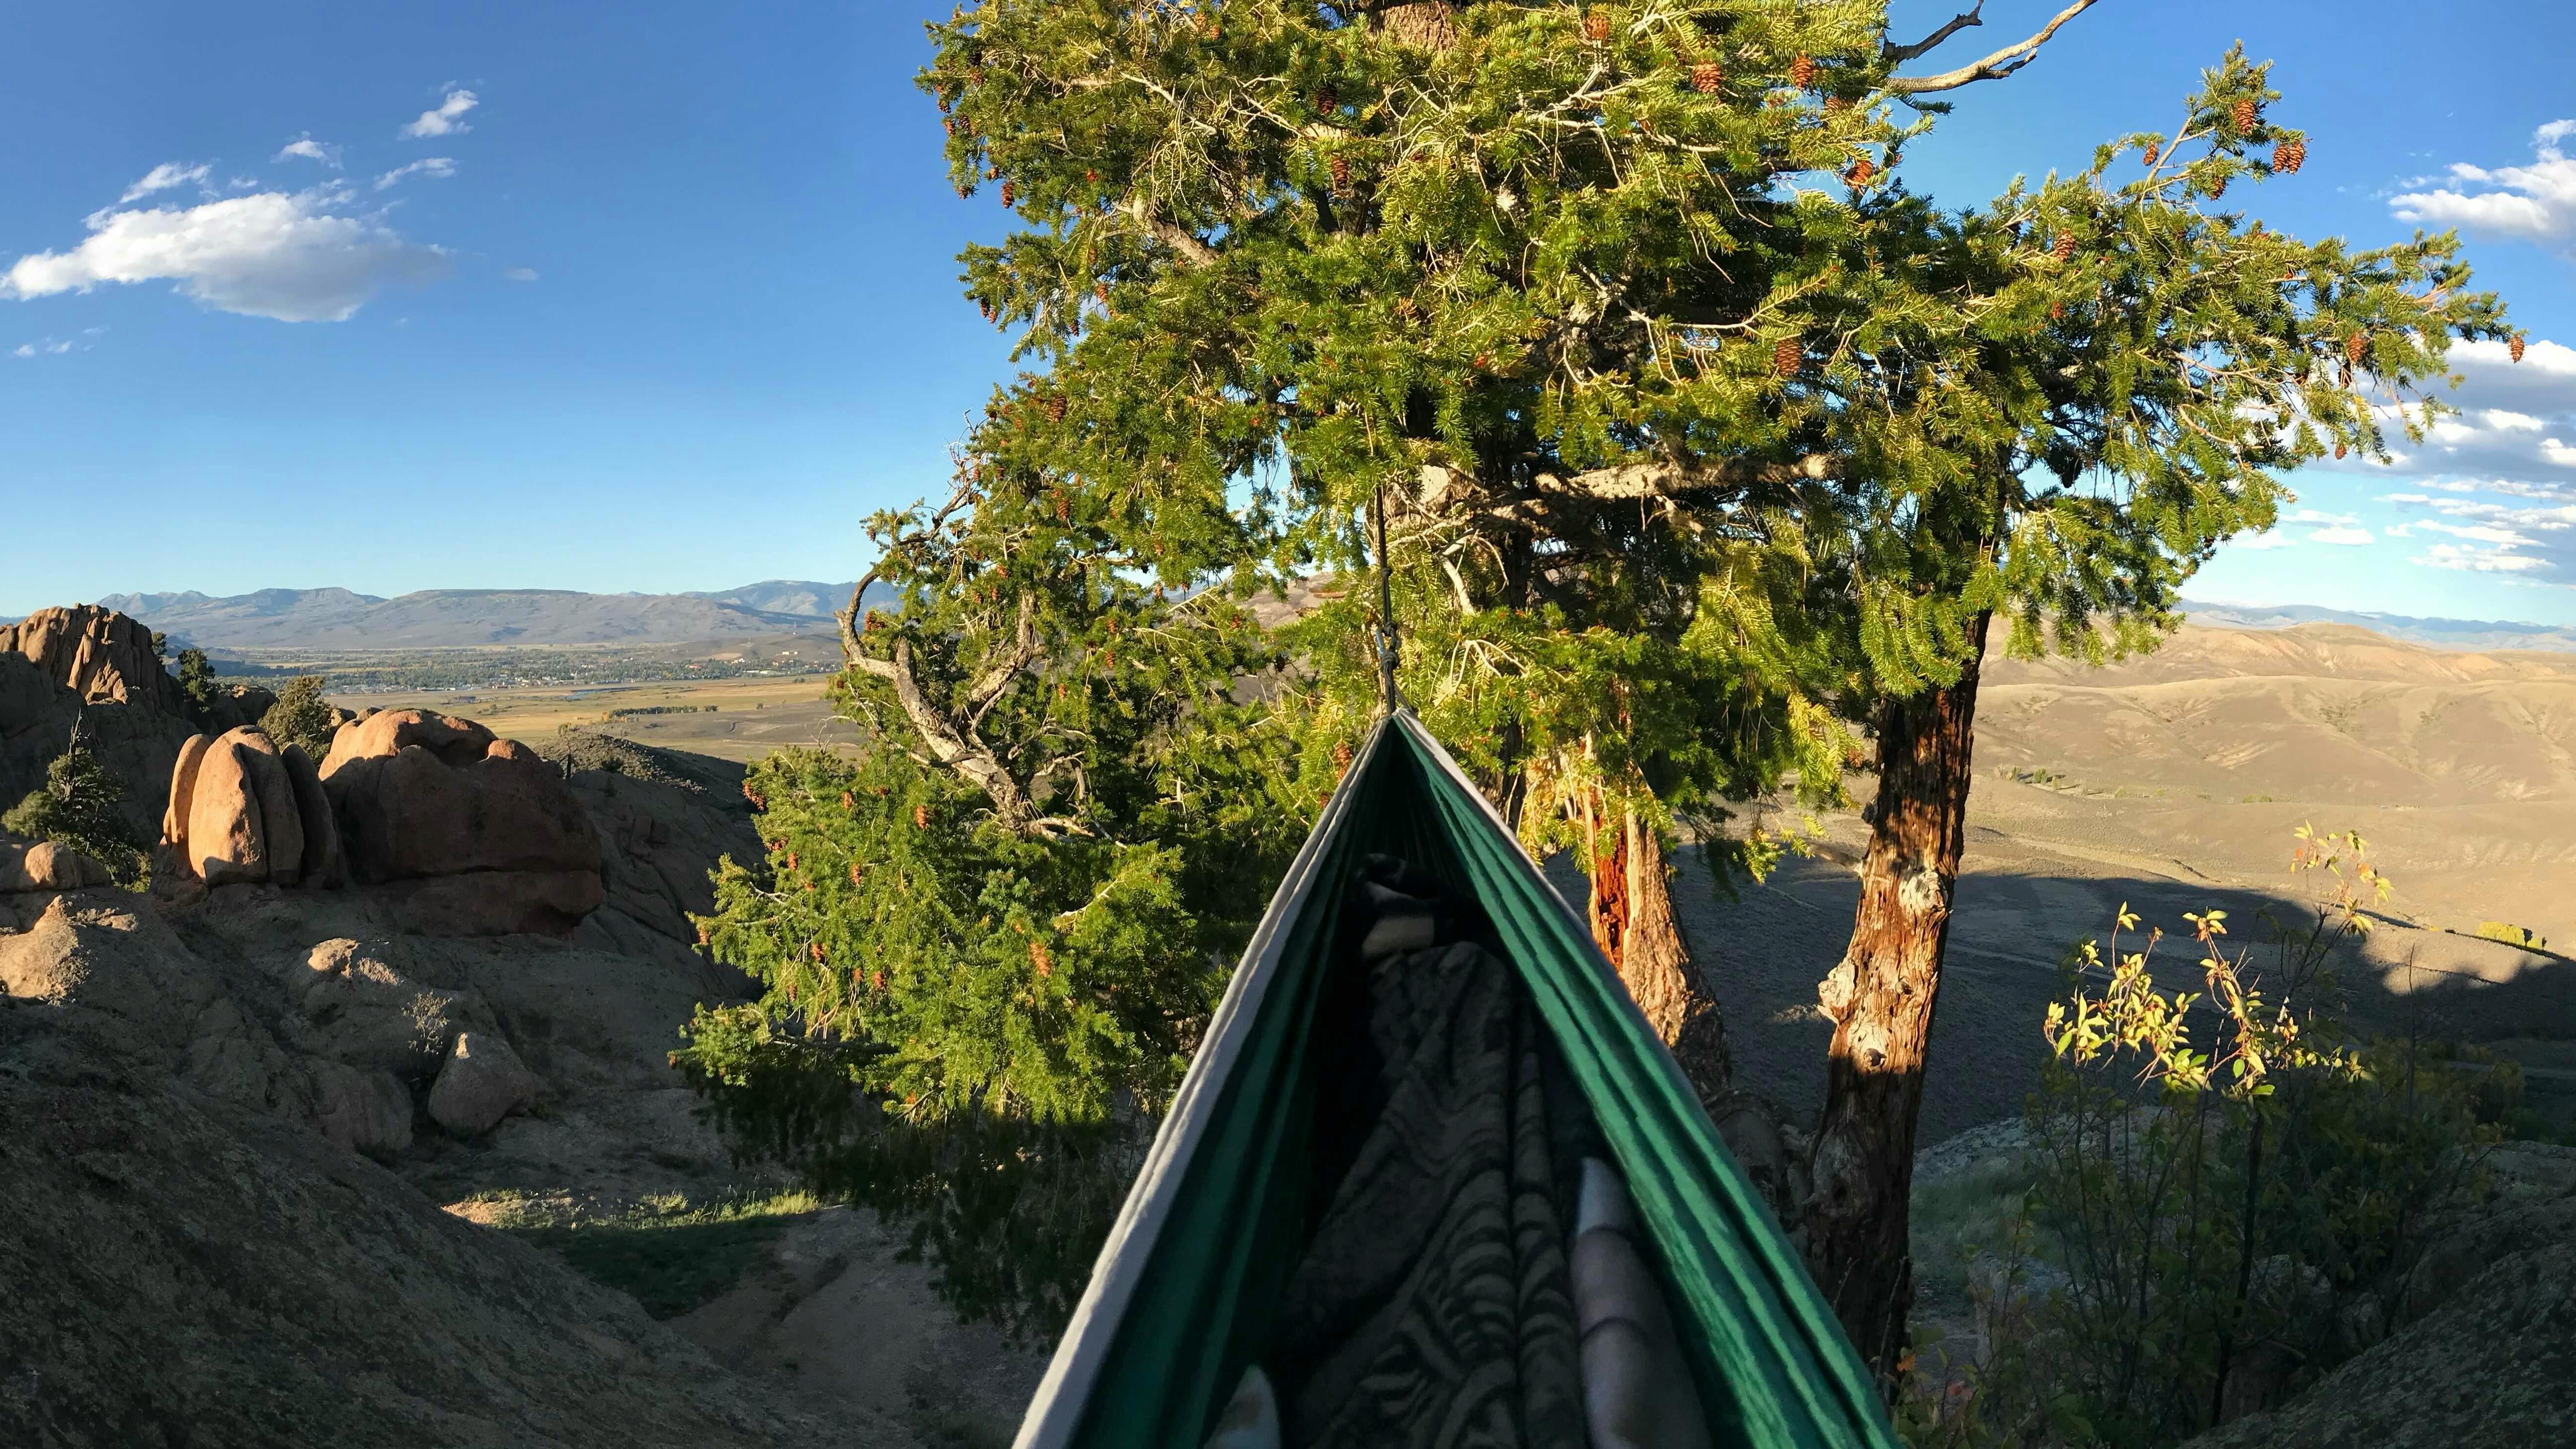 A green hammock is stretched between two trees and we look down the length of it towards an expansive view of interesting rock features.